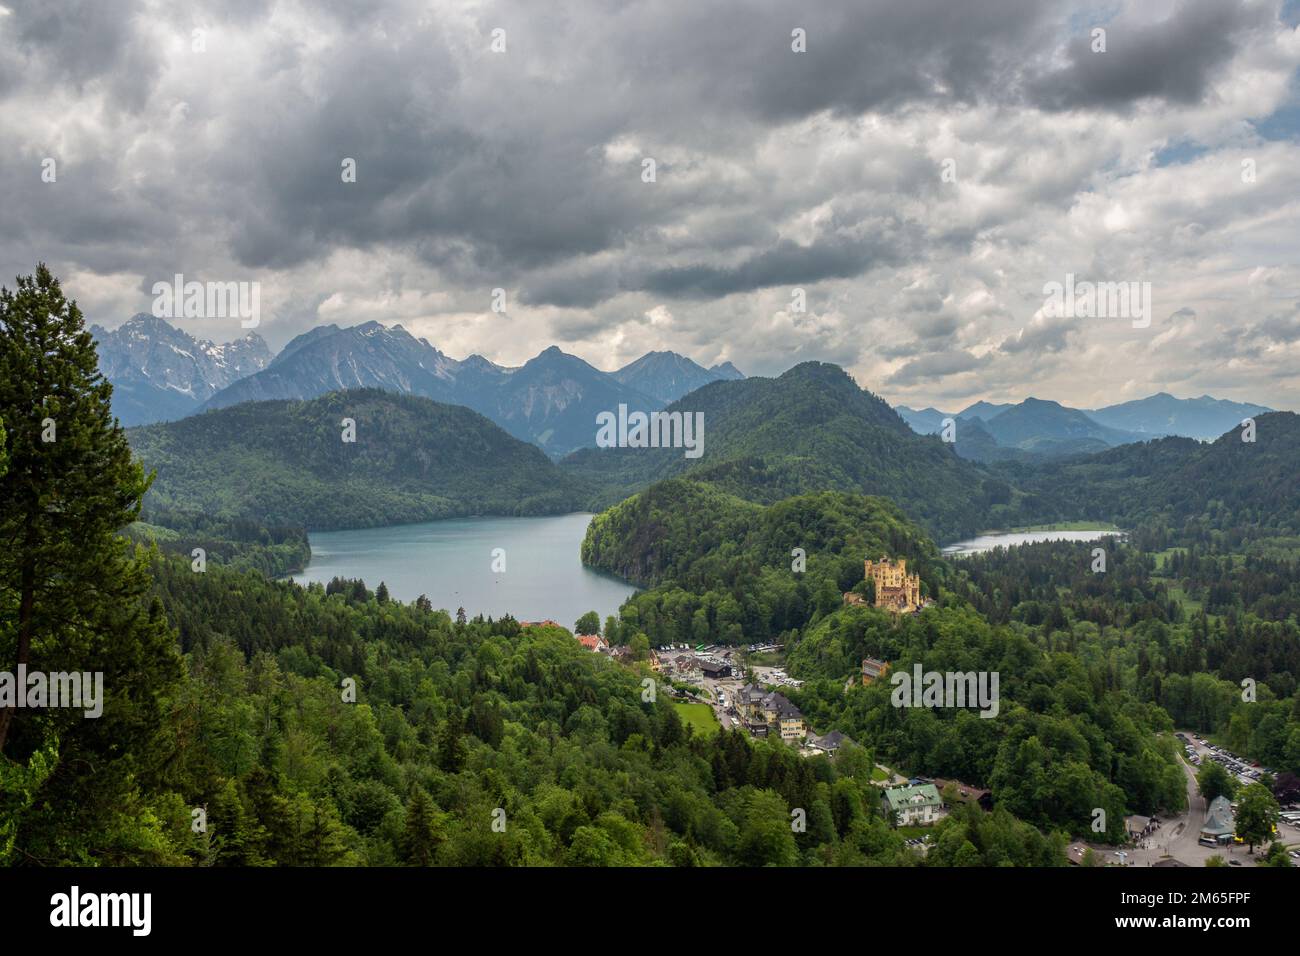 View of Hohenschwangau Castle, a 19th century palace and Alpsee lake located in the German town of Hohenschwangau, near the city of Füssen, Germany. Stock Photo